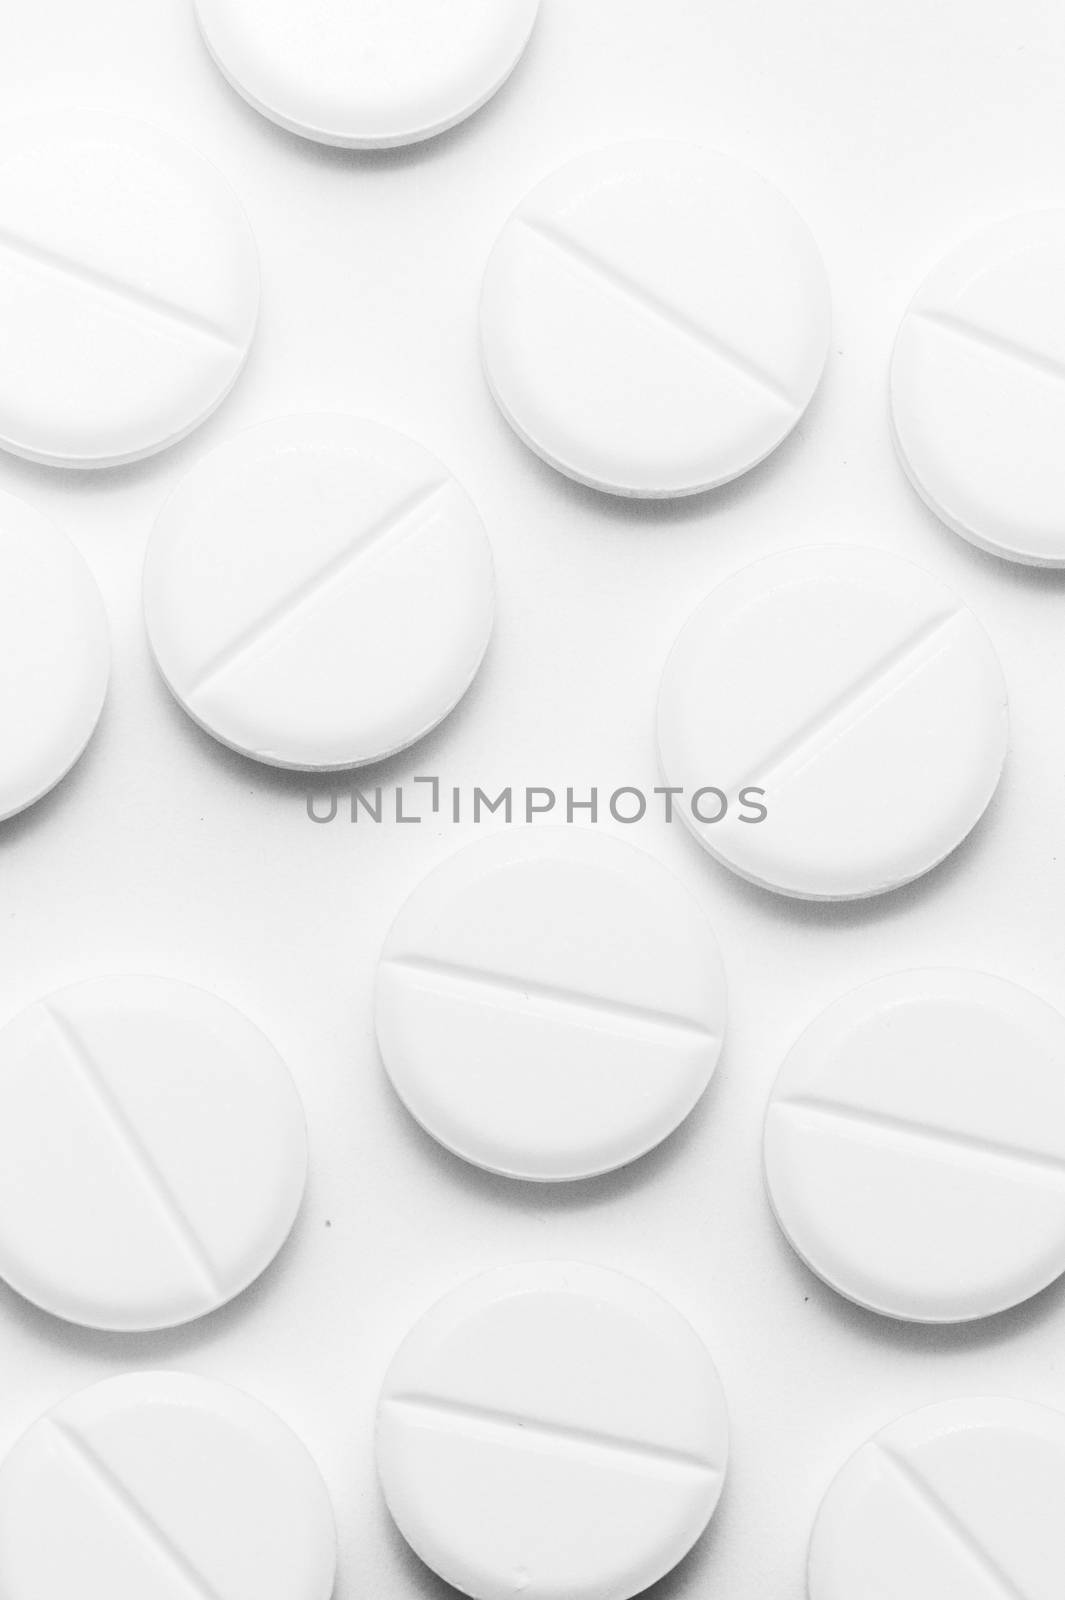 White pills on white background. Close-up view. Medical background. Healthcare image. by alexsdriver